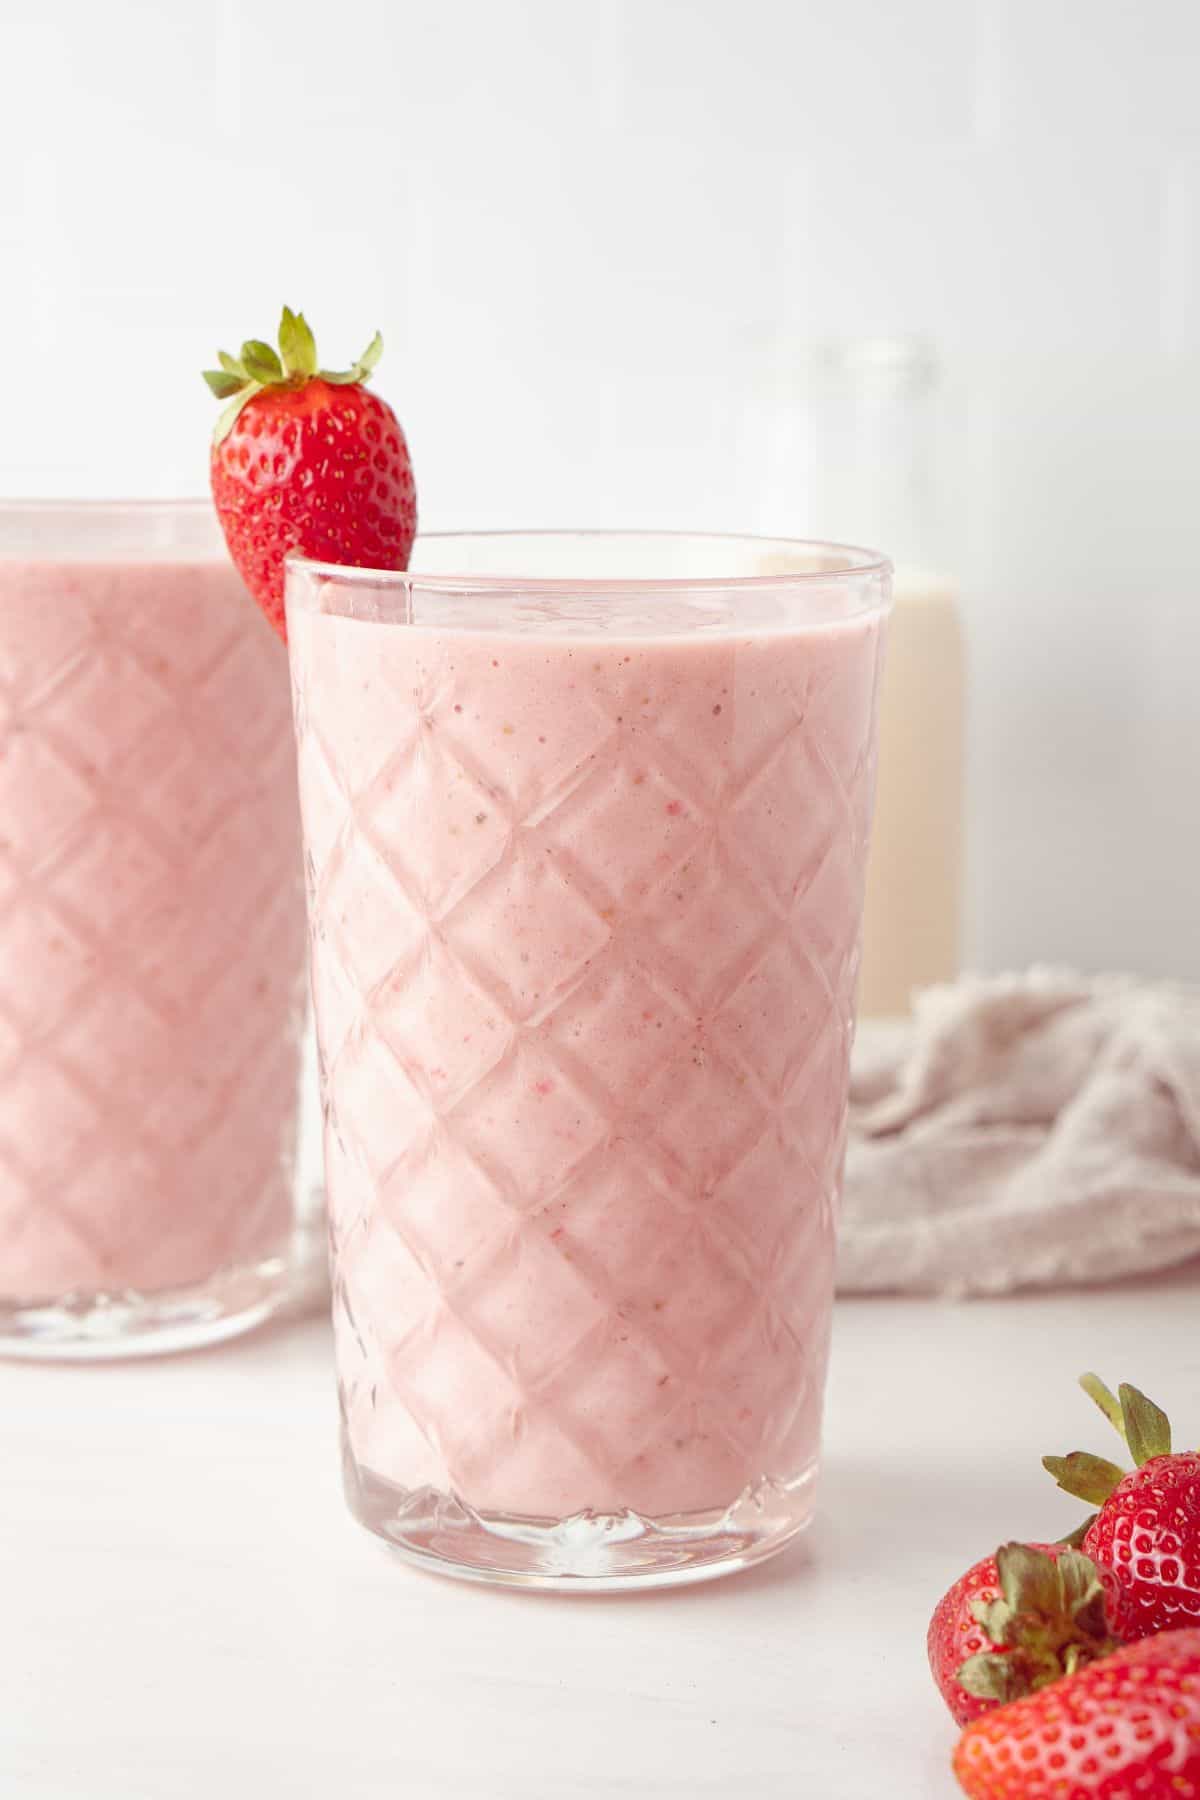 Two glasses full of Strawberry and Banana Smoothie, with a strawberry on the edge of the glass.